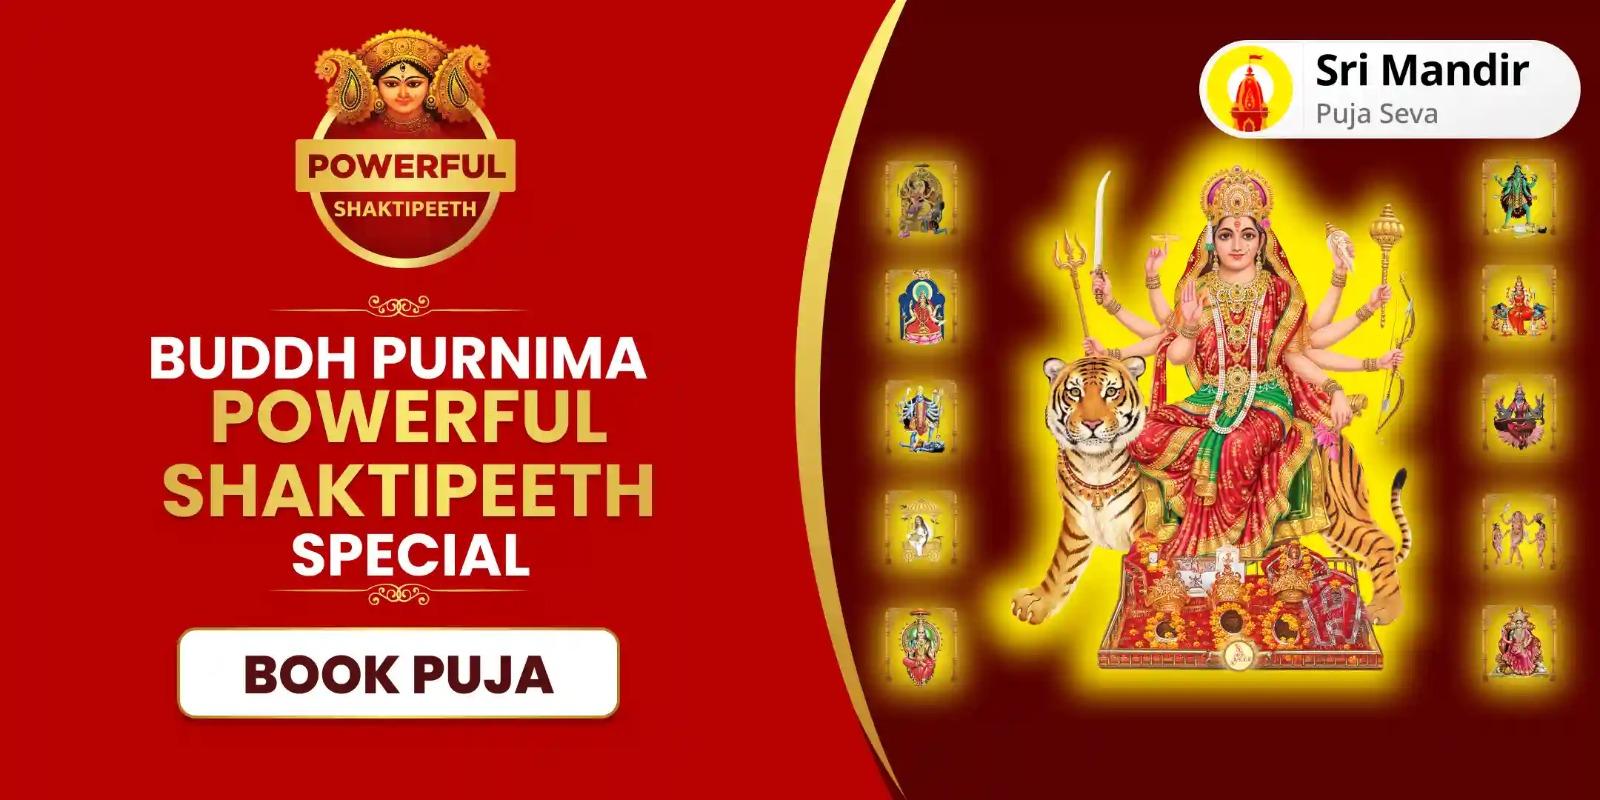 Buddh Purnima Powerful Shaktipeeth Special 10 Mahavidya Puja For Mental and Physical Well-being